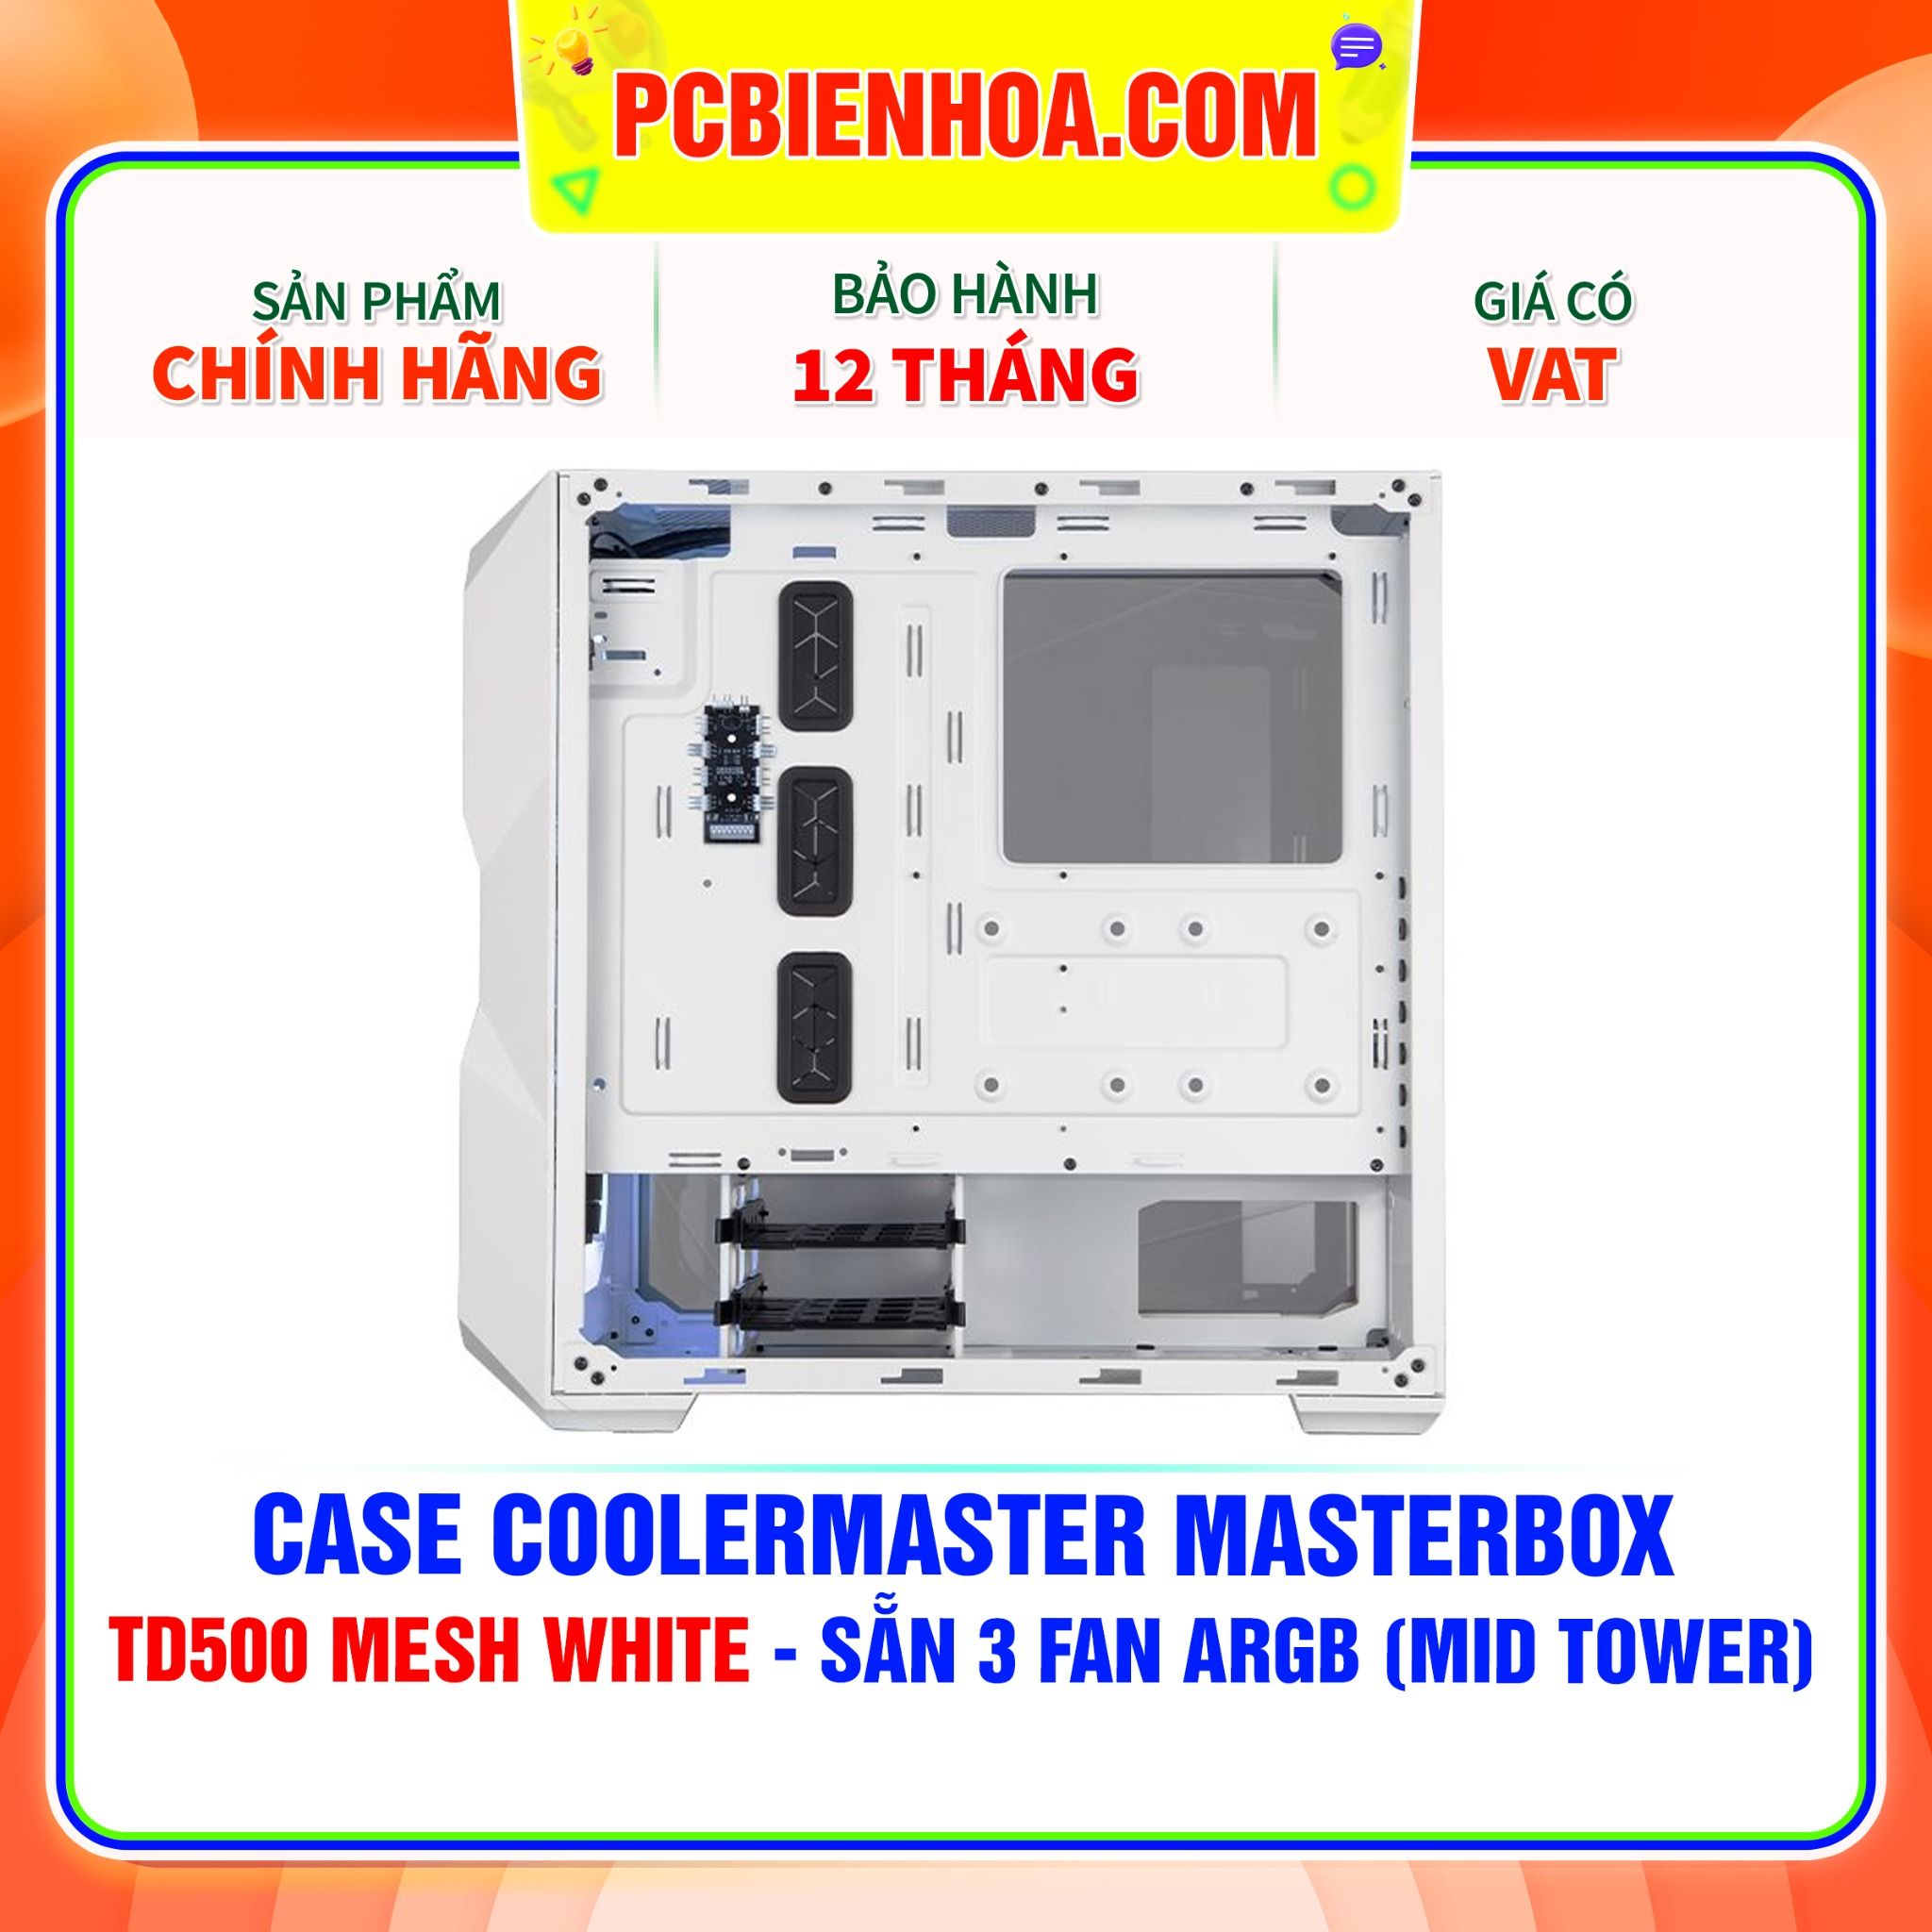  CASE COOLERMASTER MASTERBOX TD500 MESH WHITE - SẴN 3 FAN ARGB (MID TOWER) 